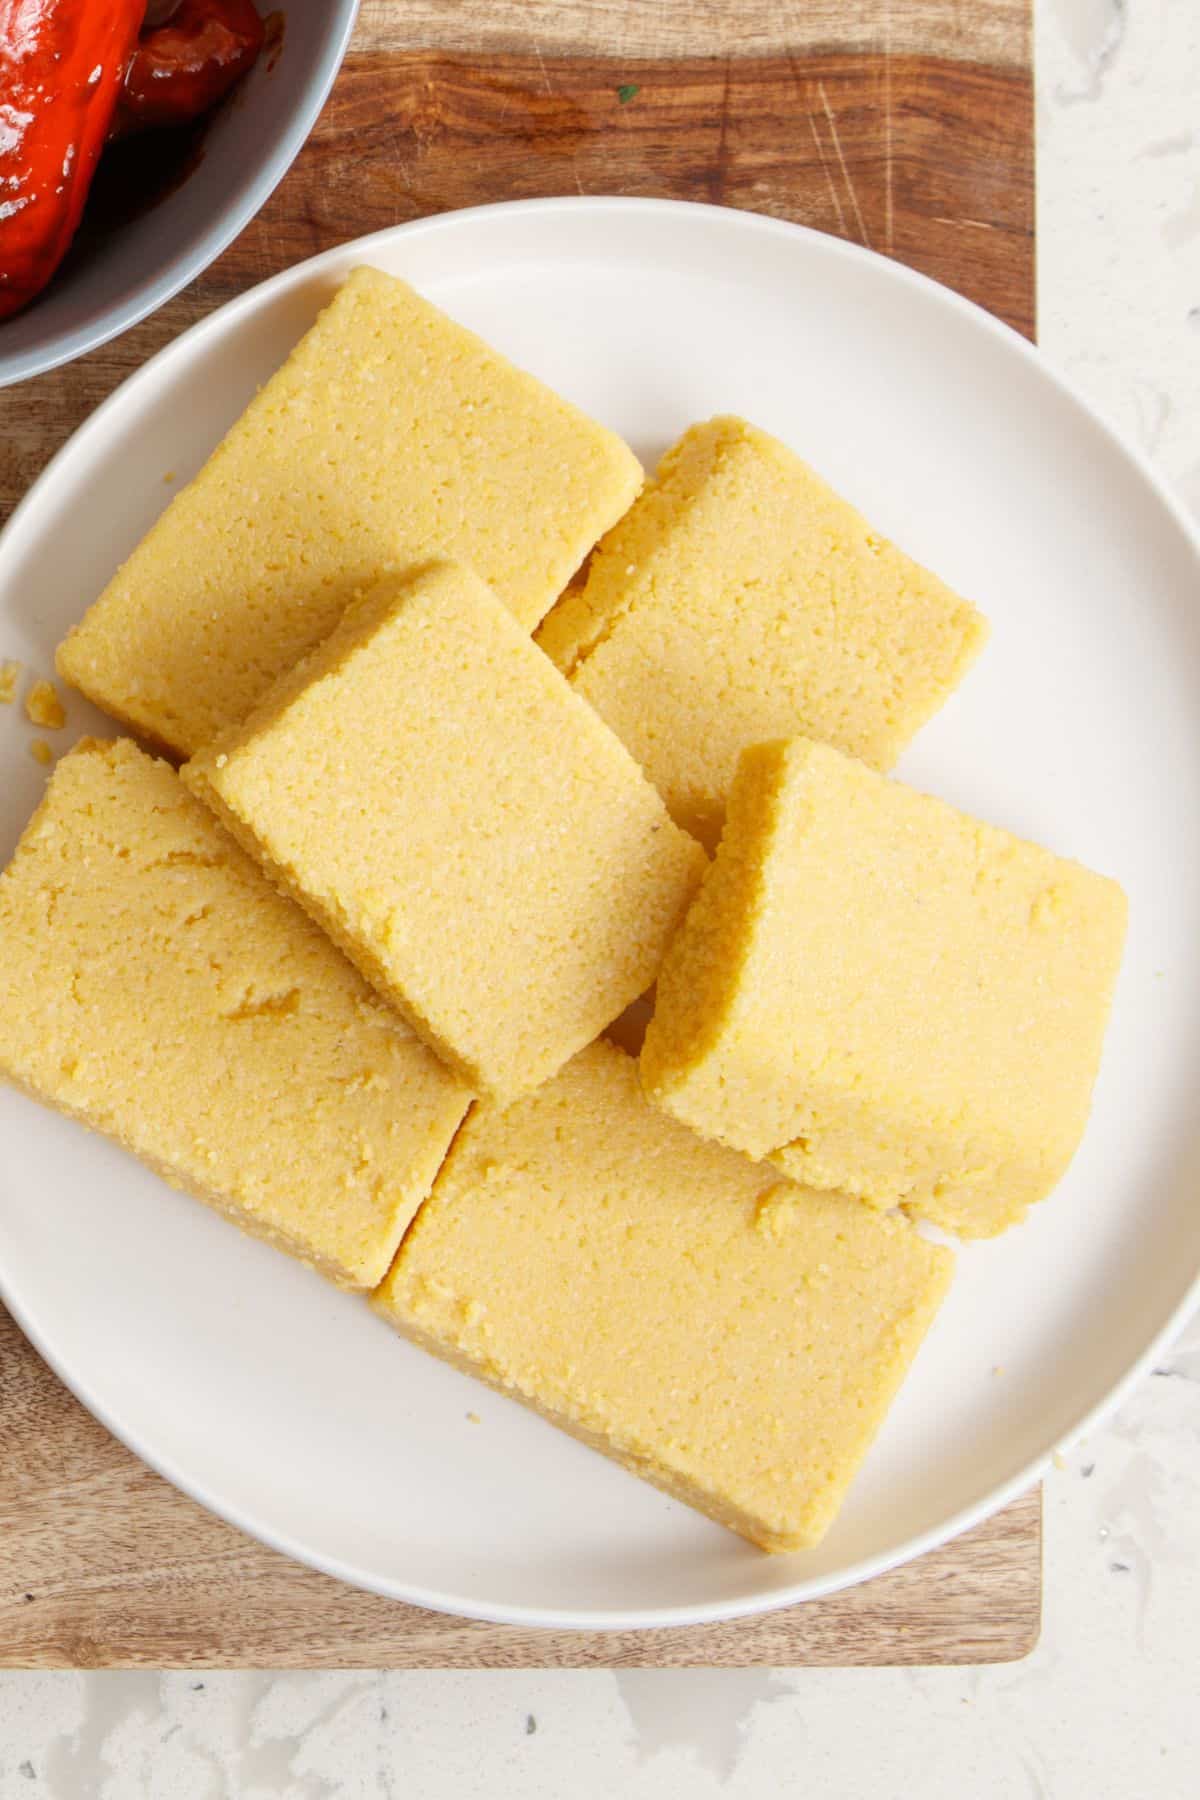 Chilled polenta pieces in a plate.